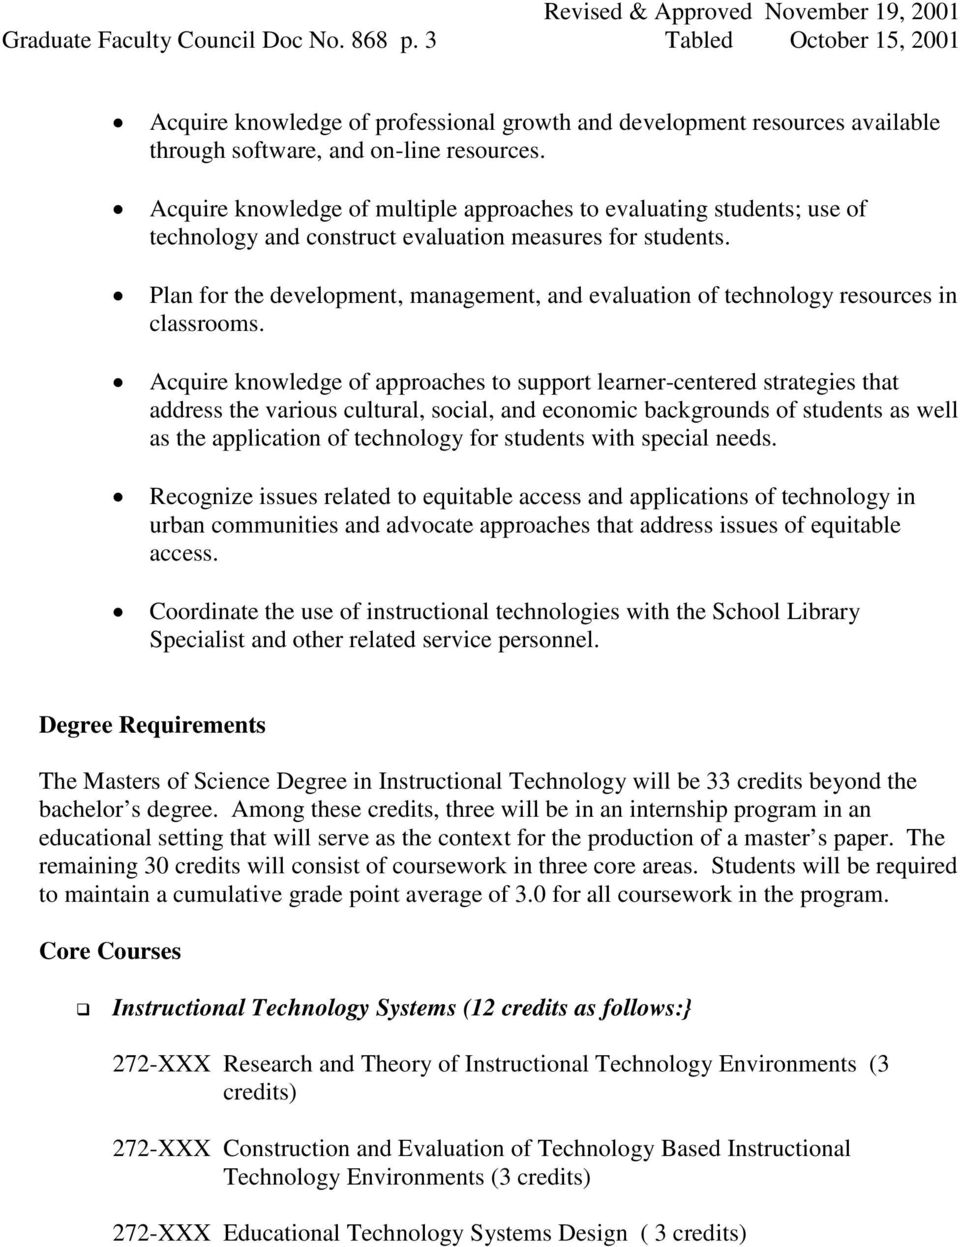 Plan for the development, management, and evaluation of technology resources in classrooms.